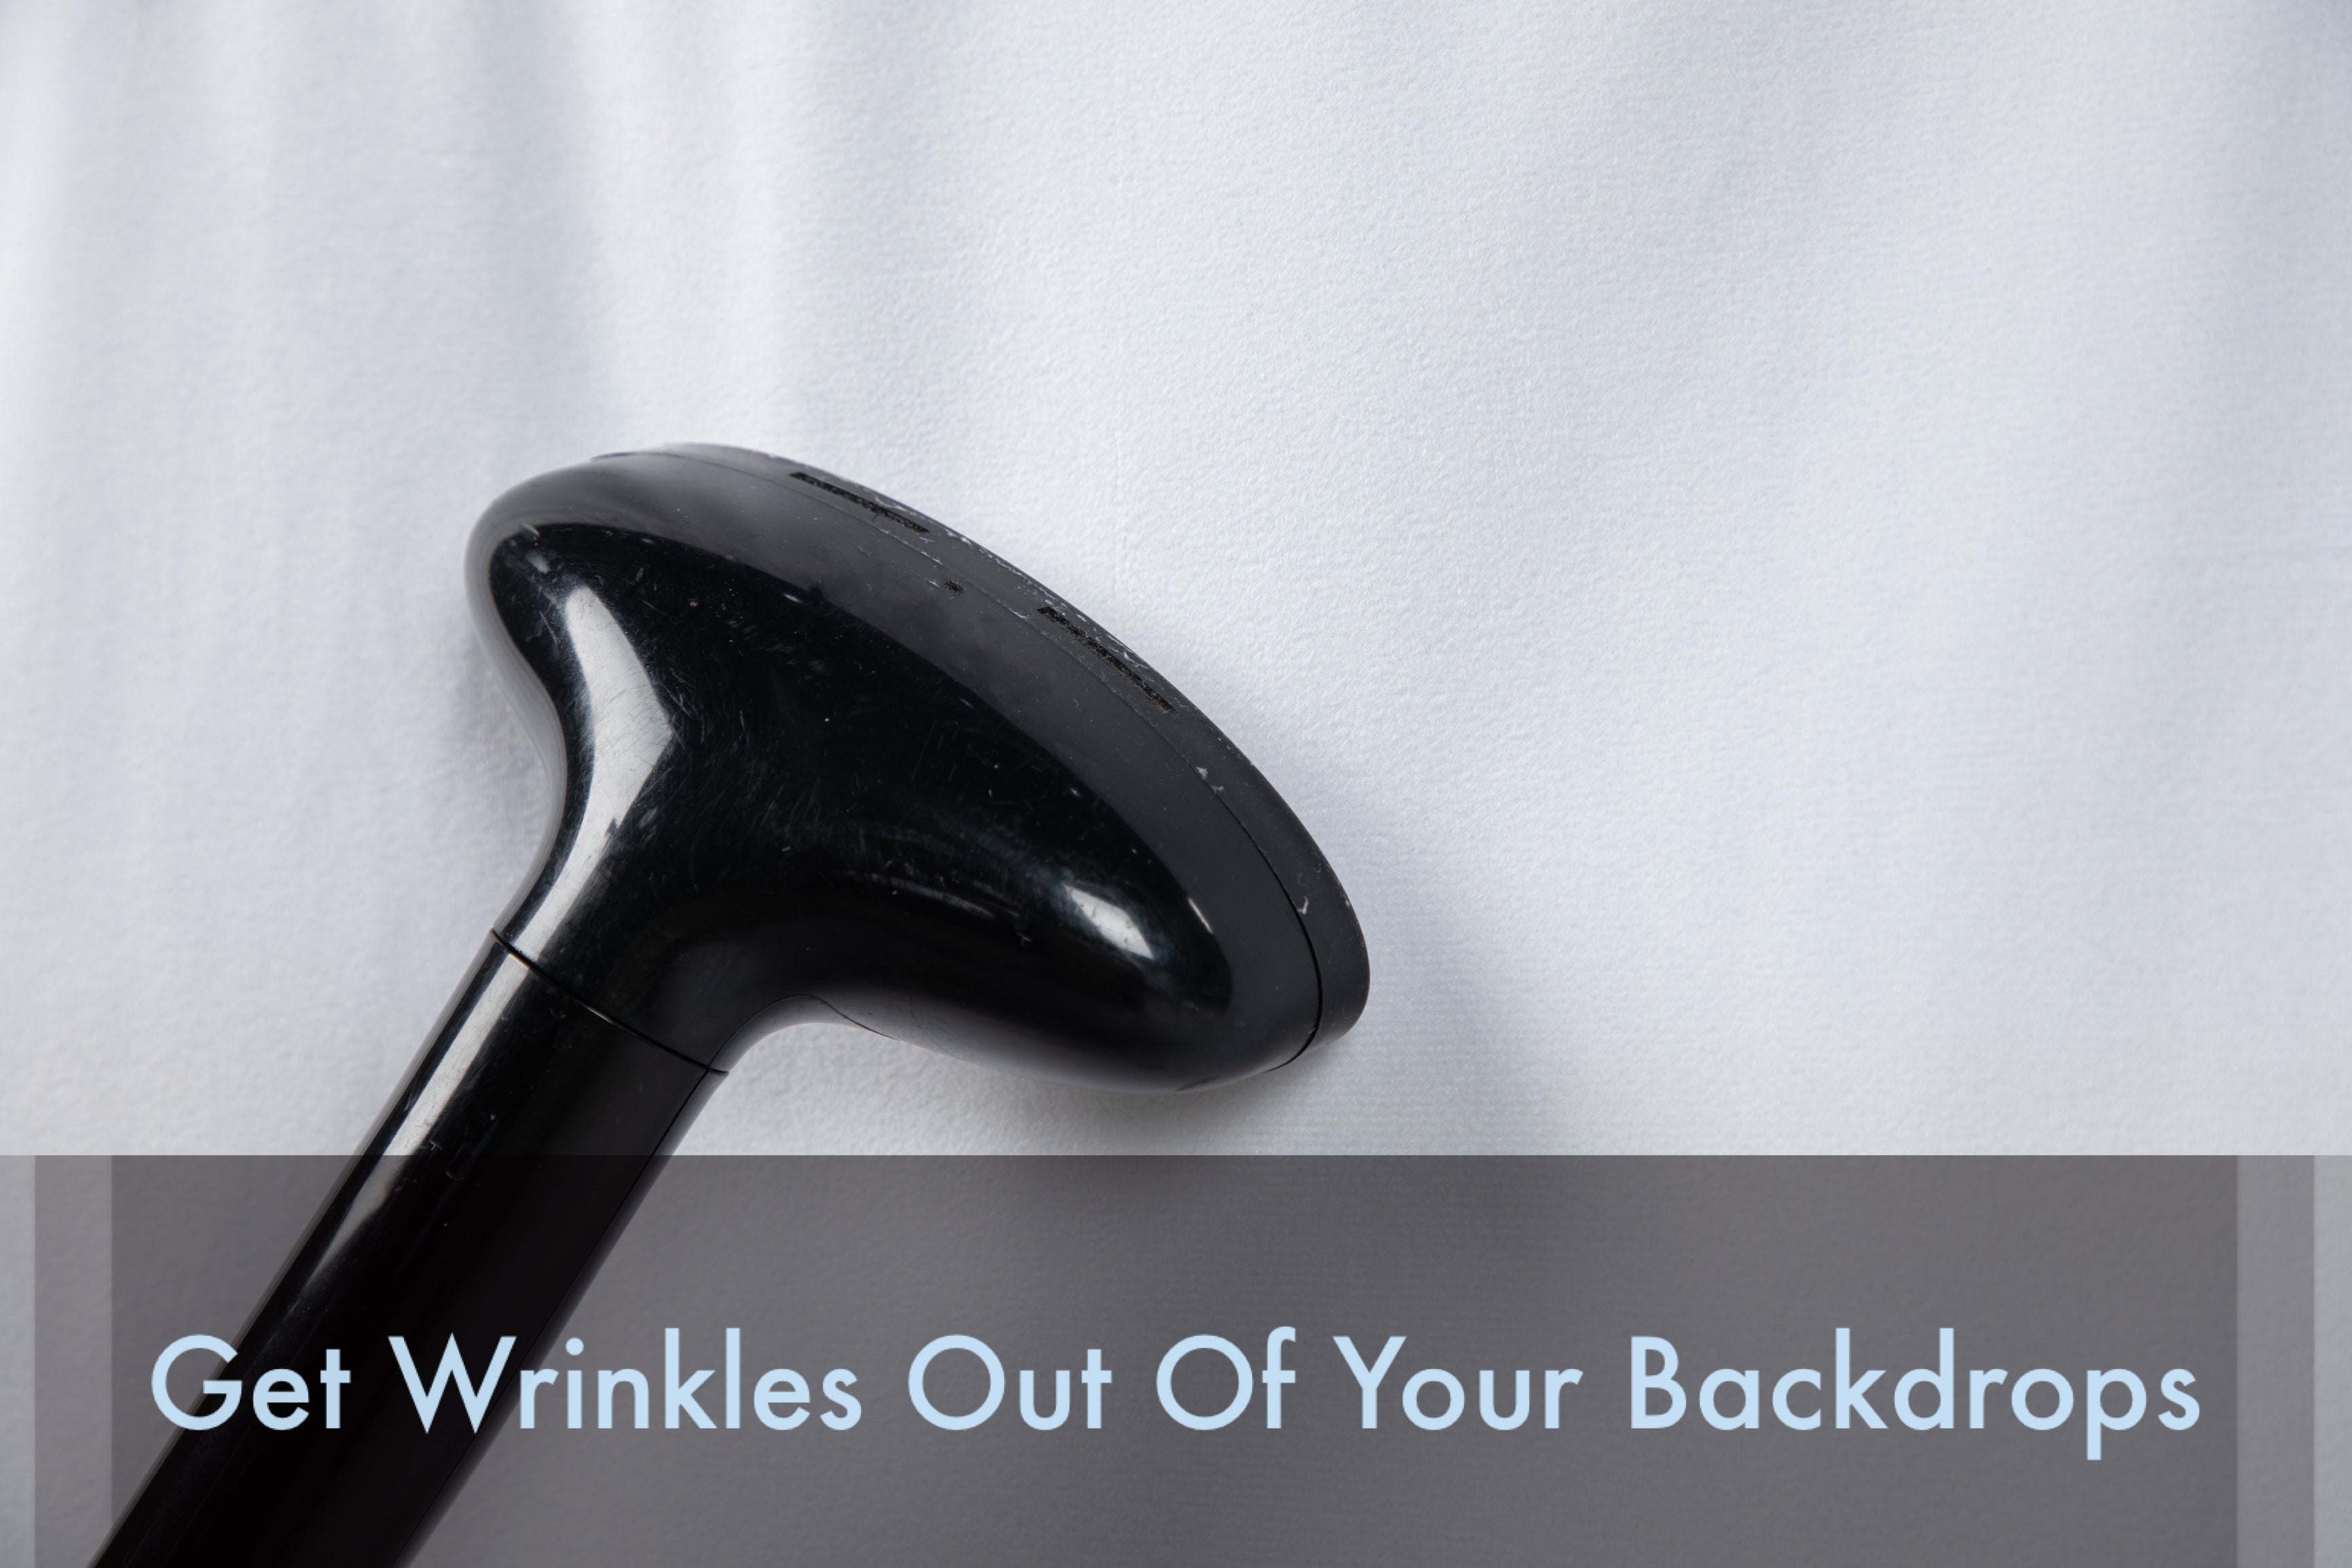 Get Wrinkles Out Of Your Backdrops